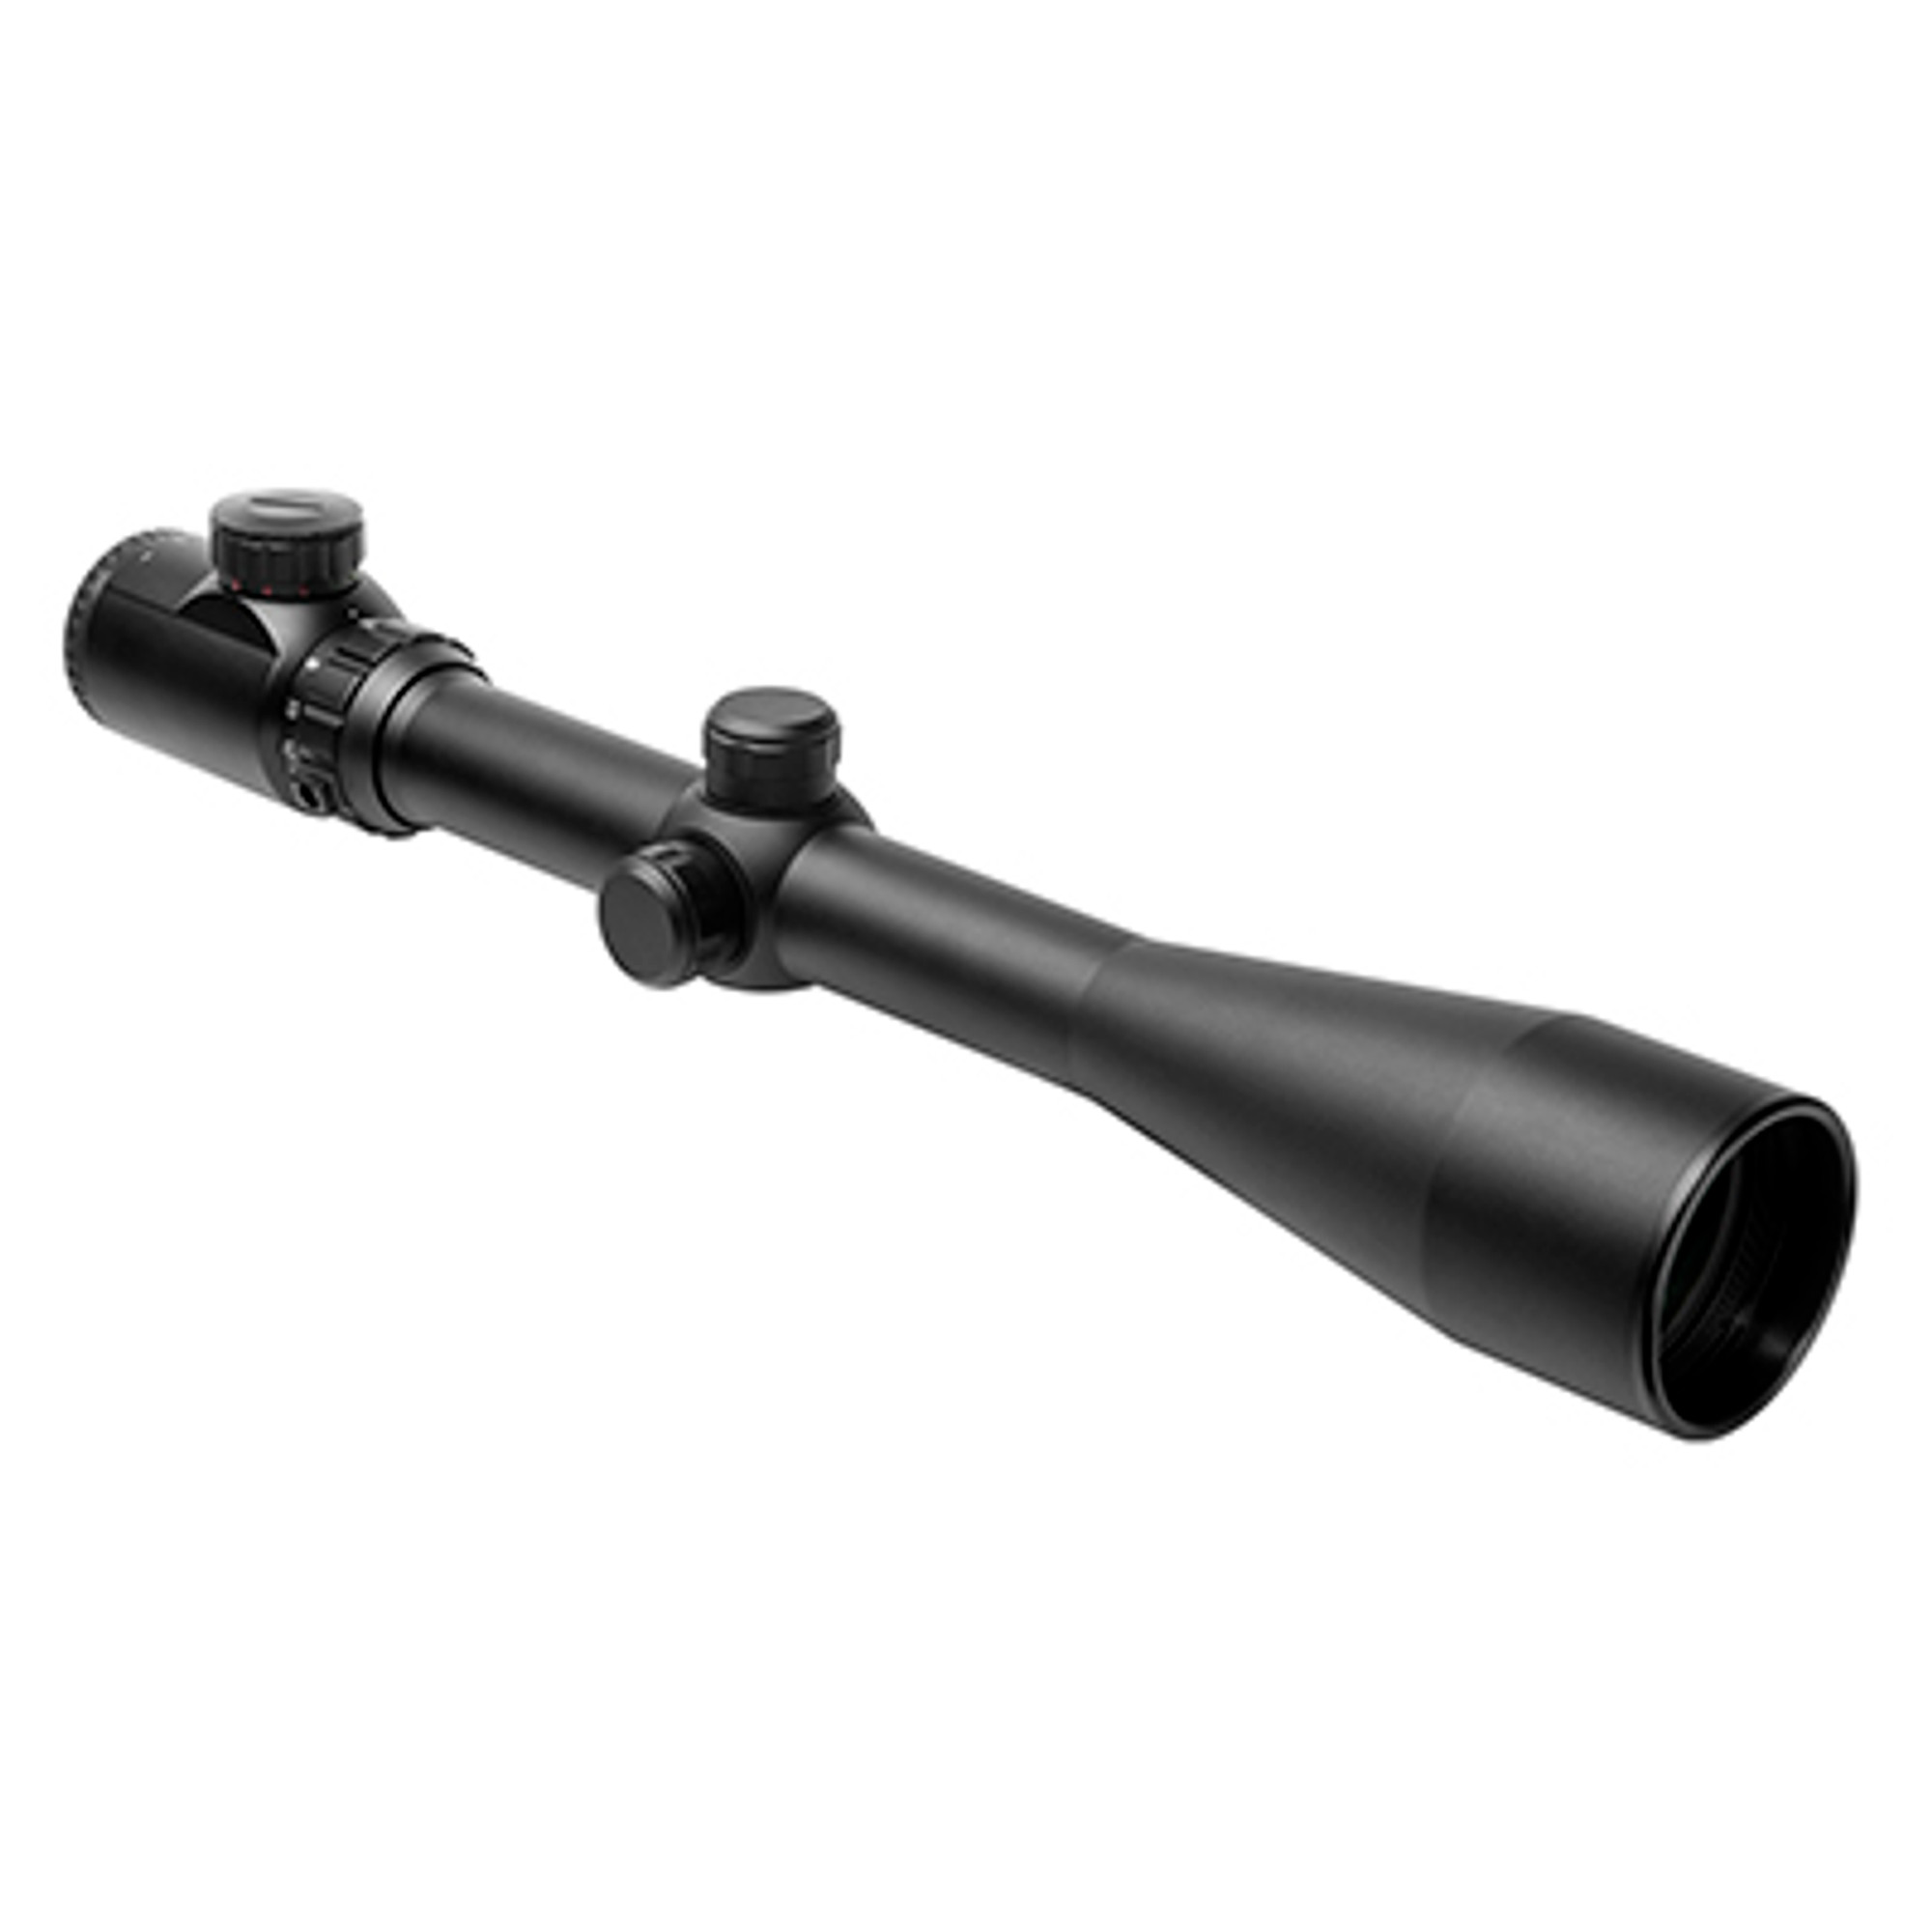 NcStar 6-24X50 Ill Reticle/30mm Tube Mil-Dot